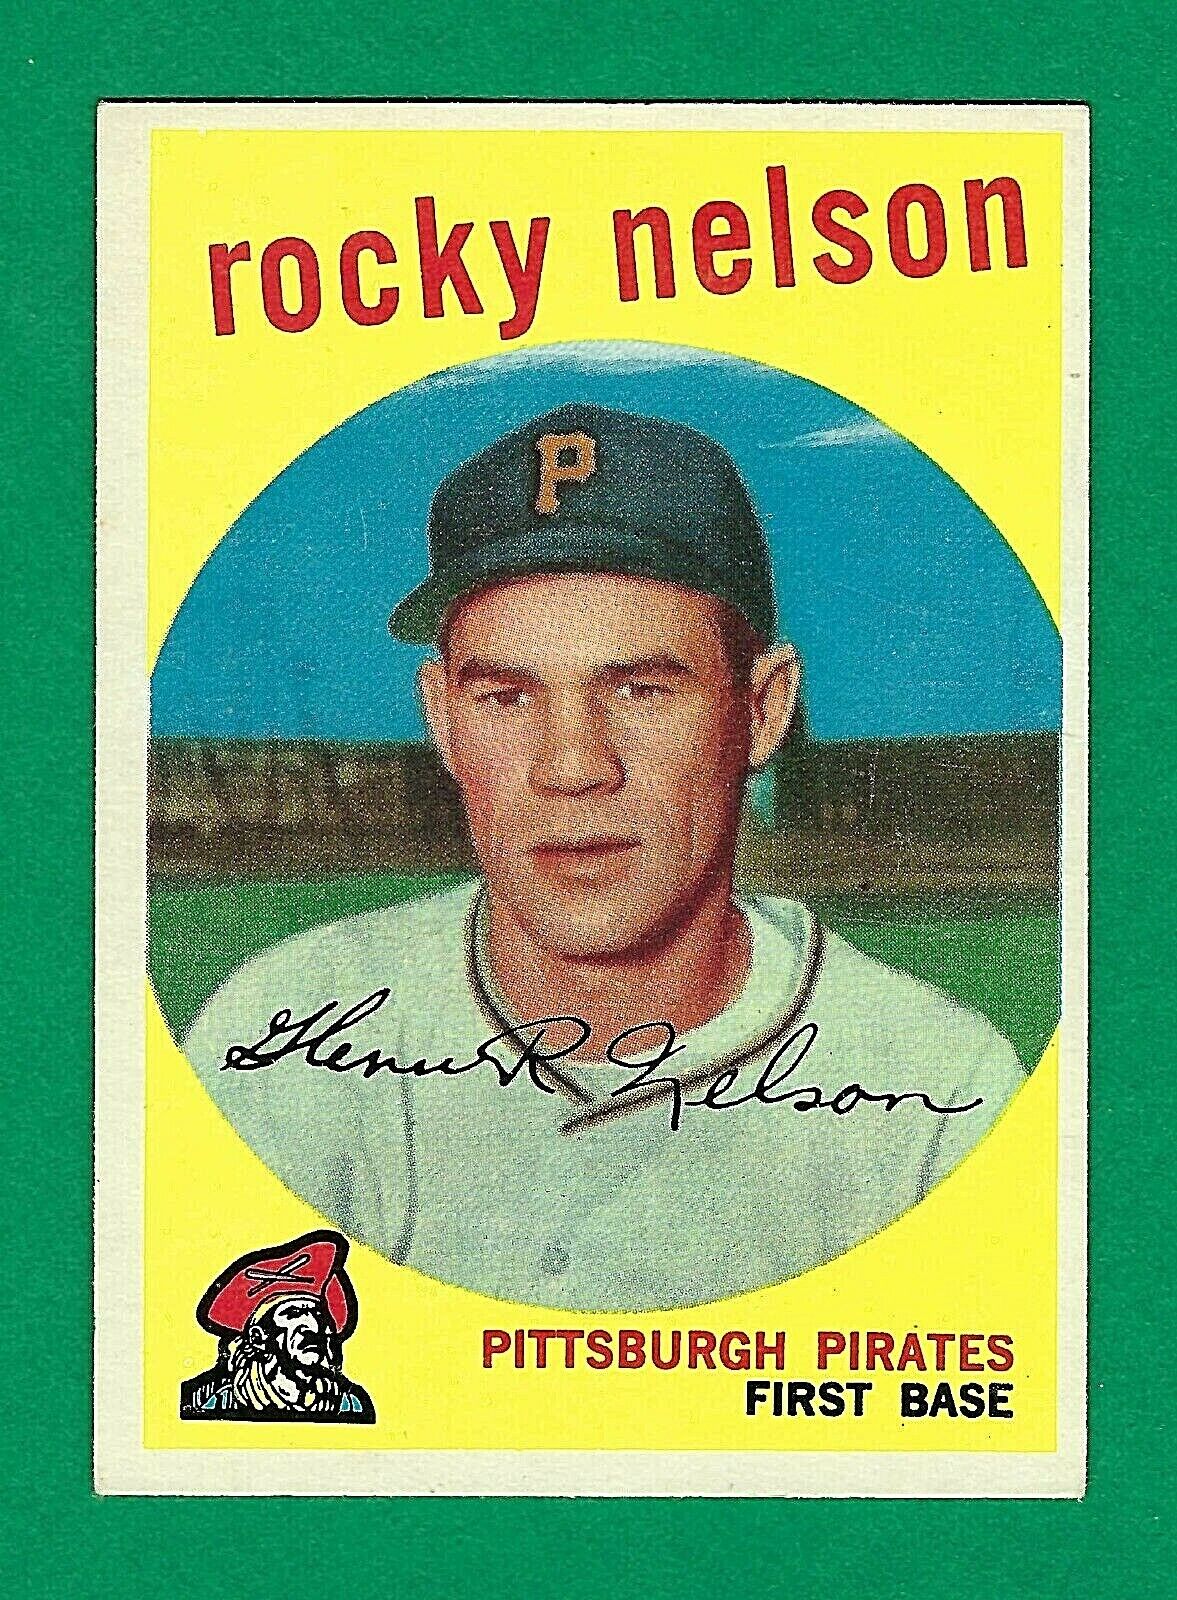 1959 Topps Baseball Cards - #446 Rocky Nelson - Pirates - ScoCards